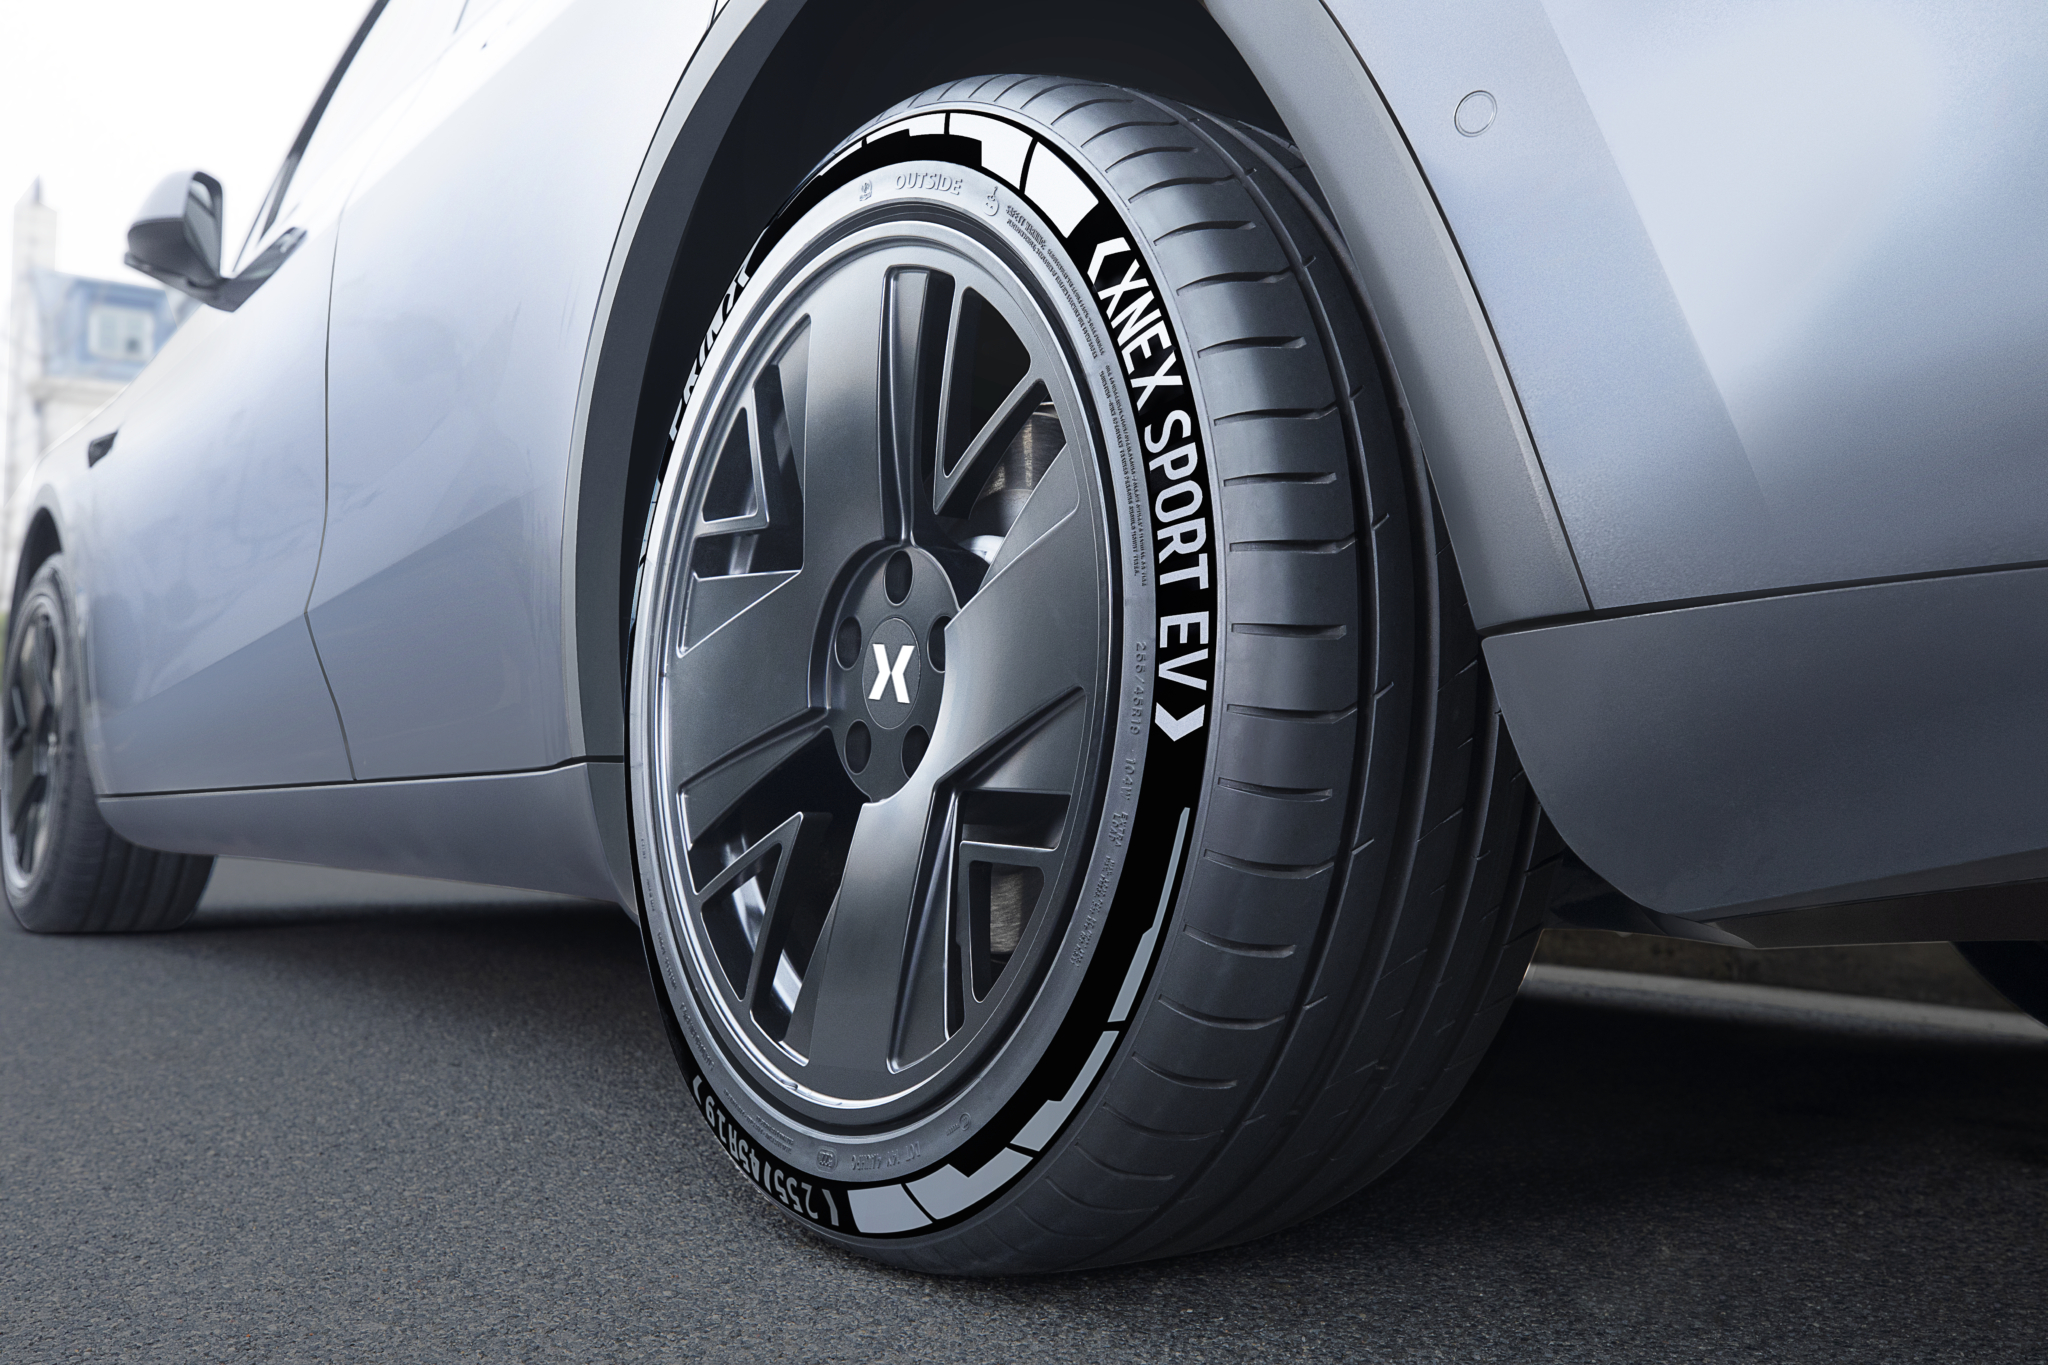 Prinx flagship car tyre brand launched in Milan